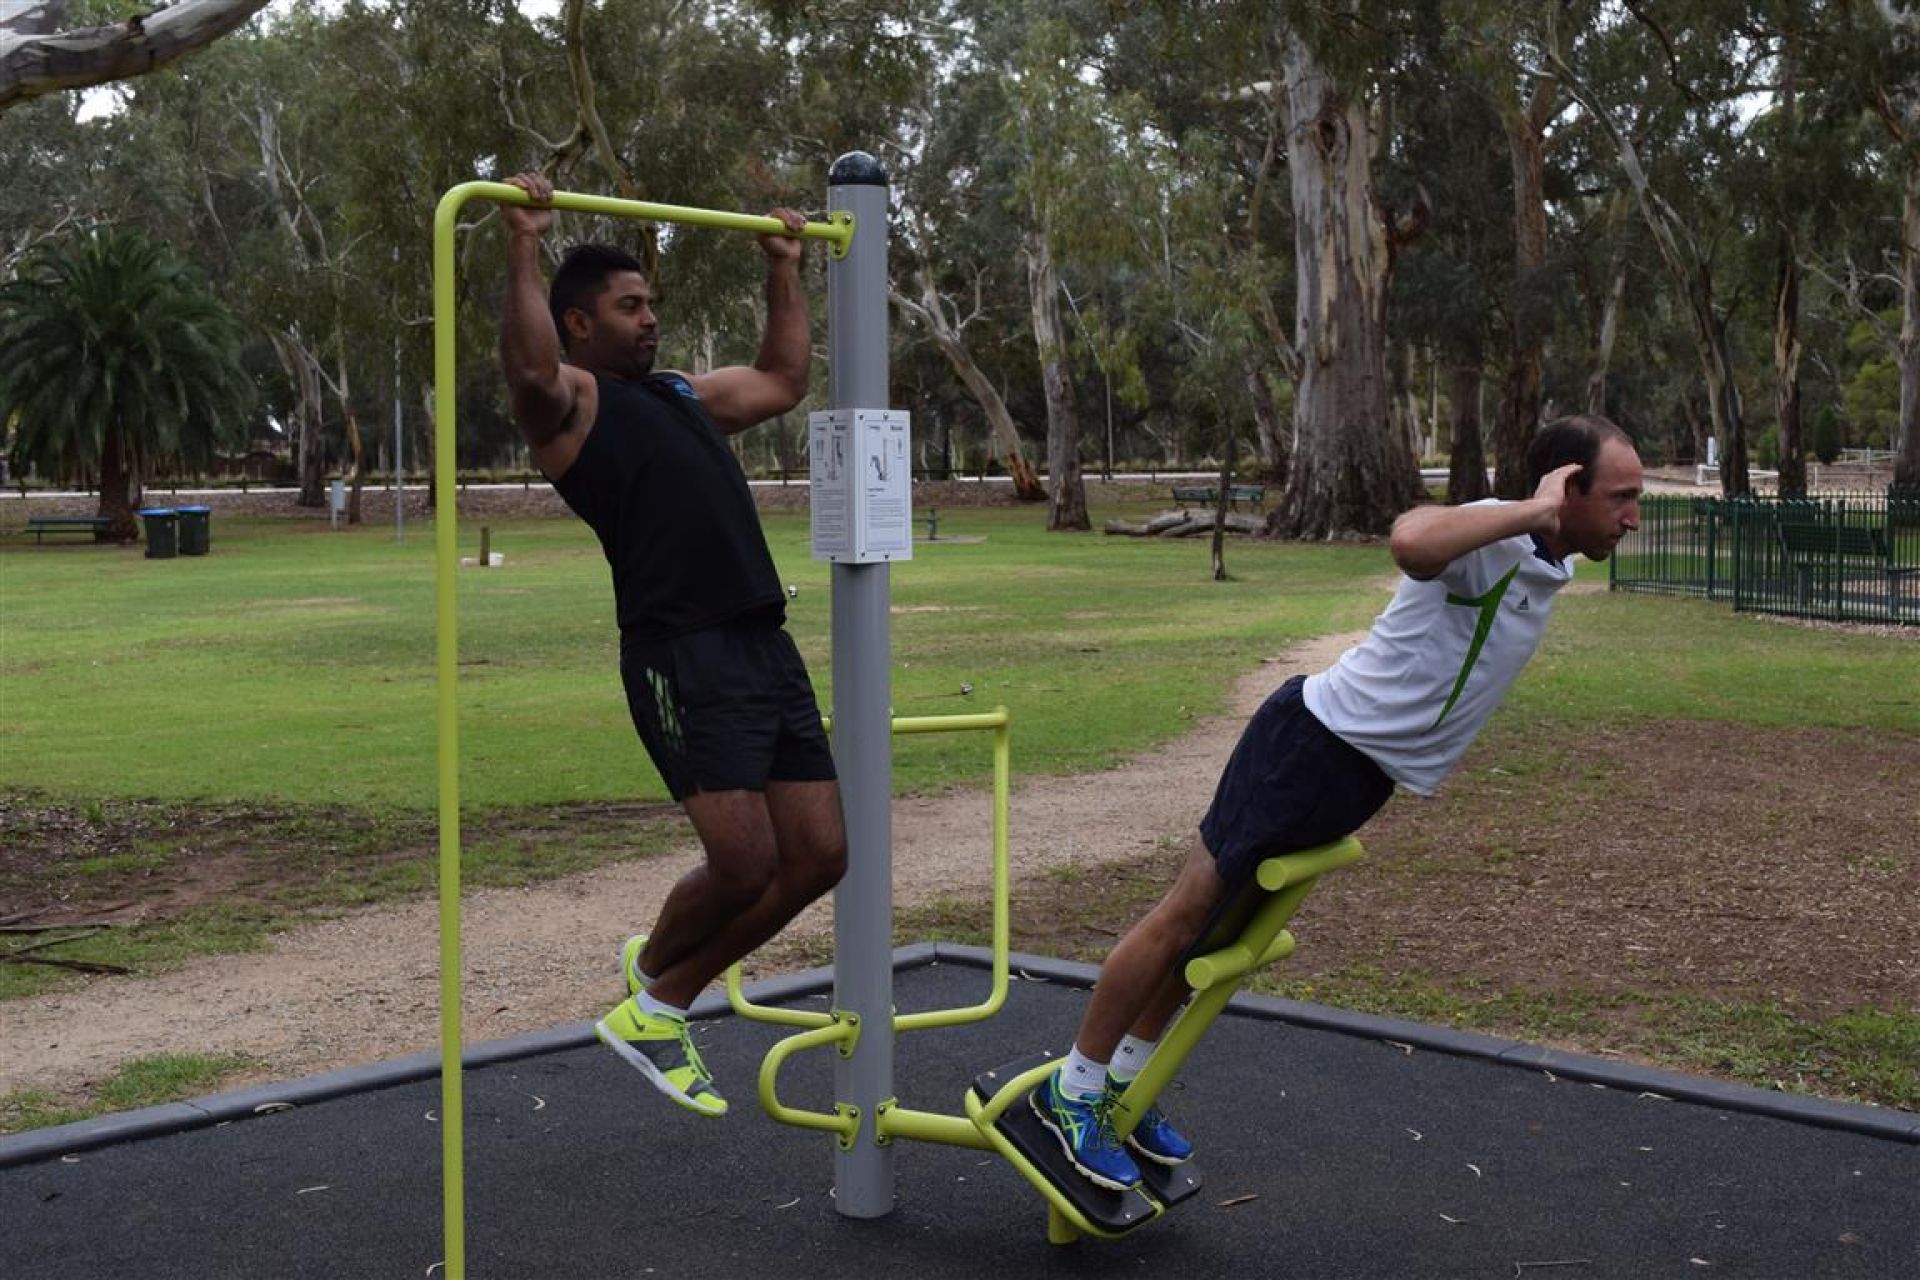 Fitness Equipment - The Gums Reserve